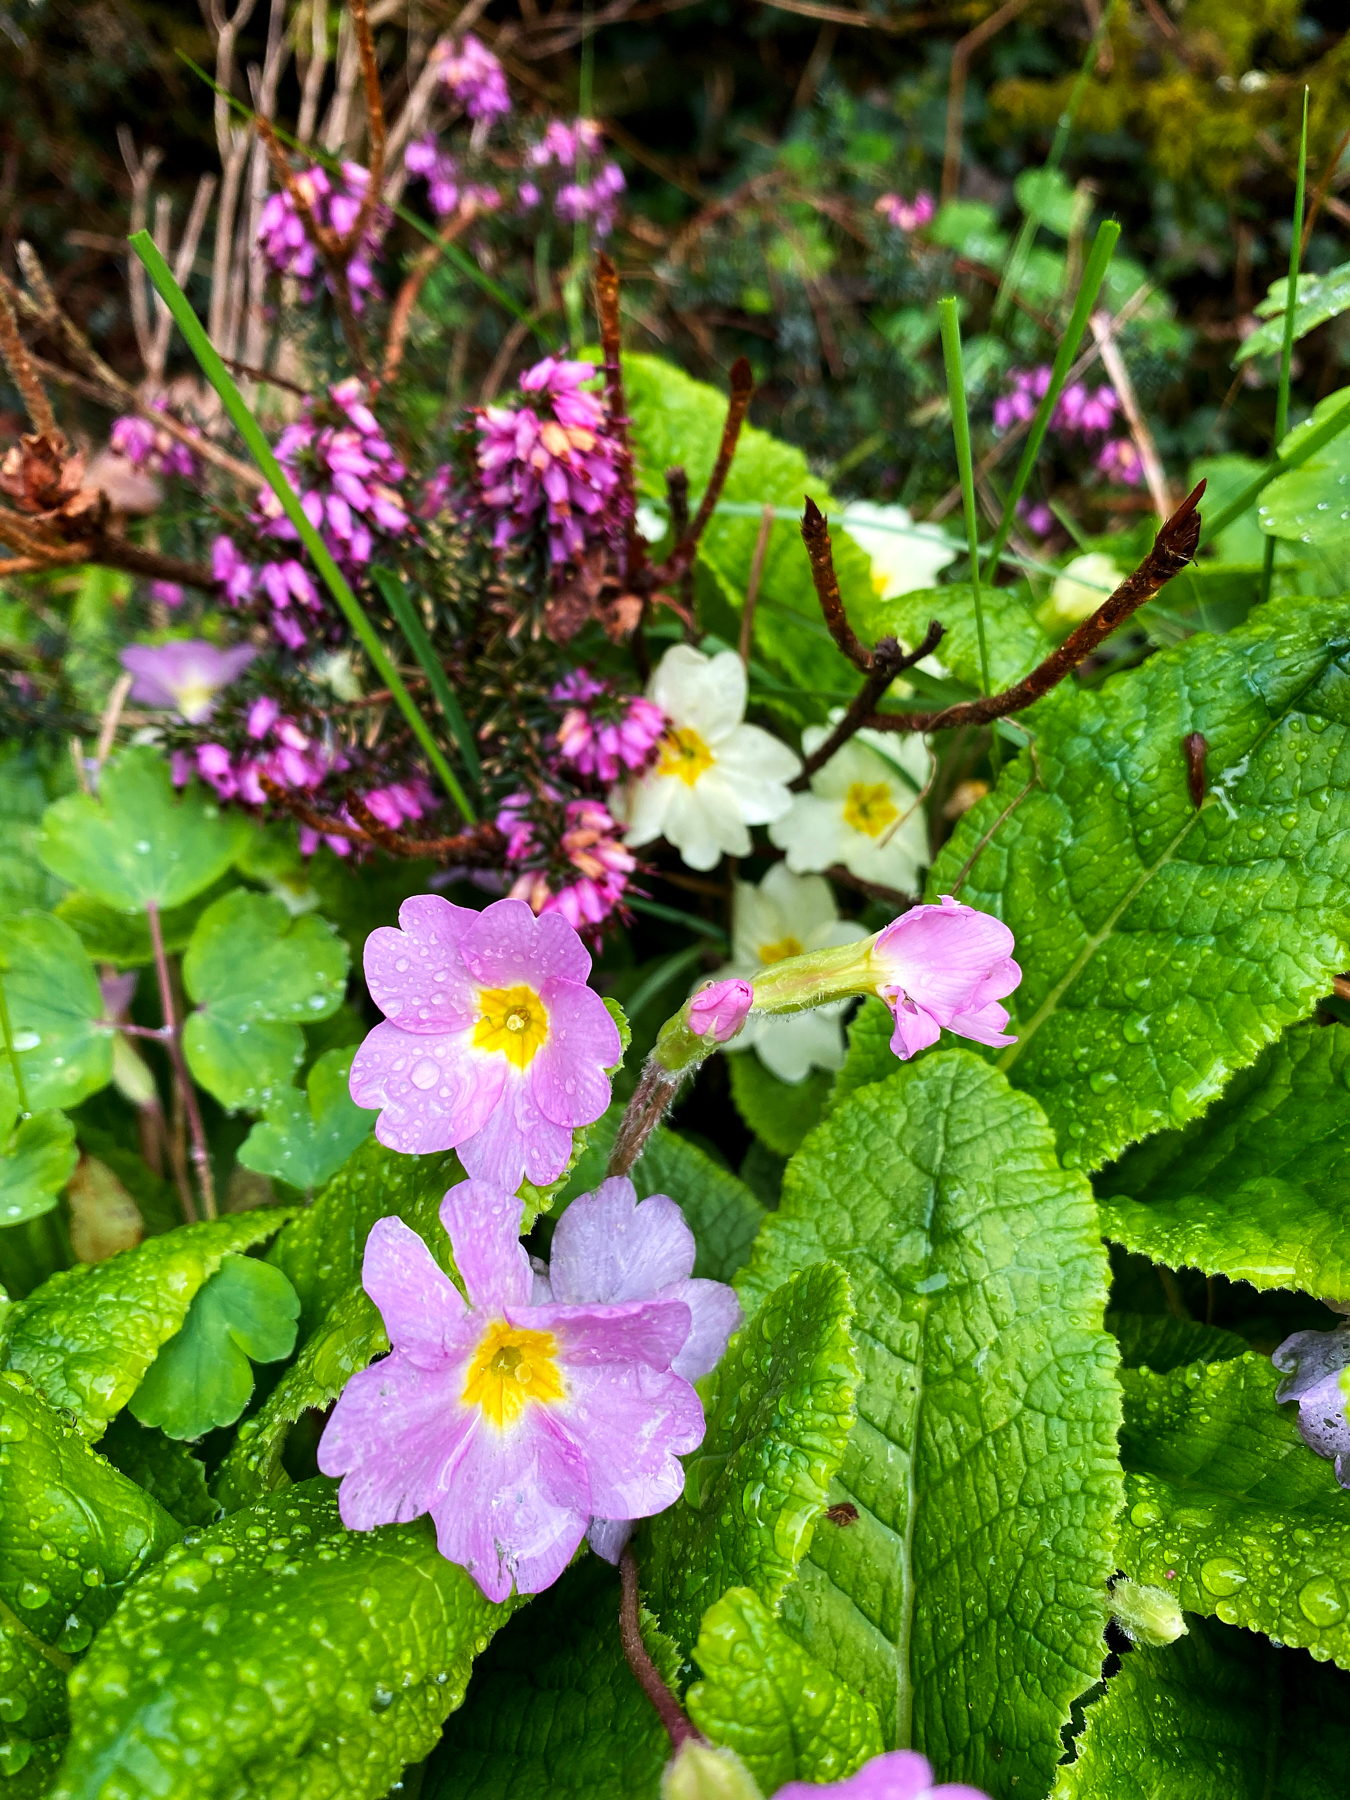 A variety of wildflowers with raindrops on their leaves and petals; prominent are pink primroses in the foreground amidst green foliage.